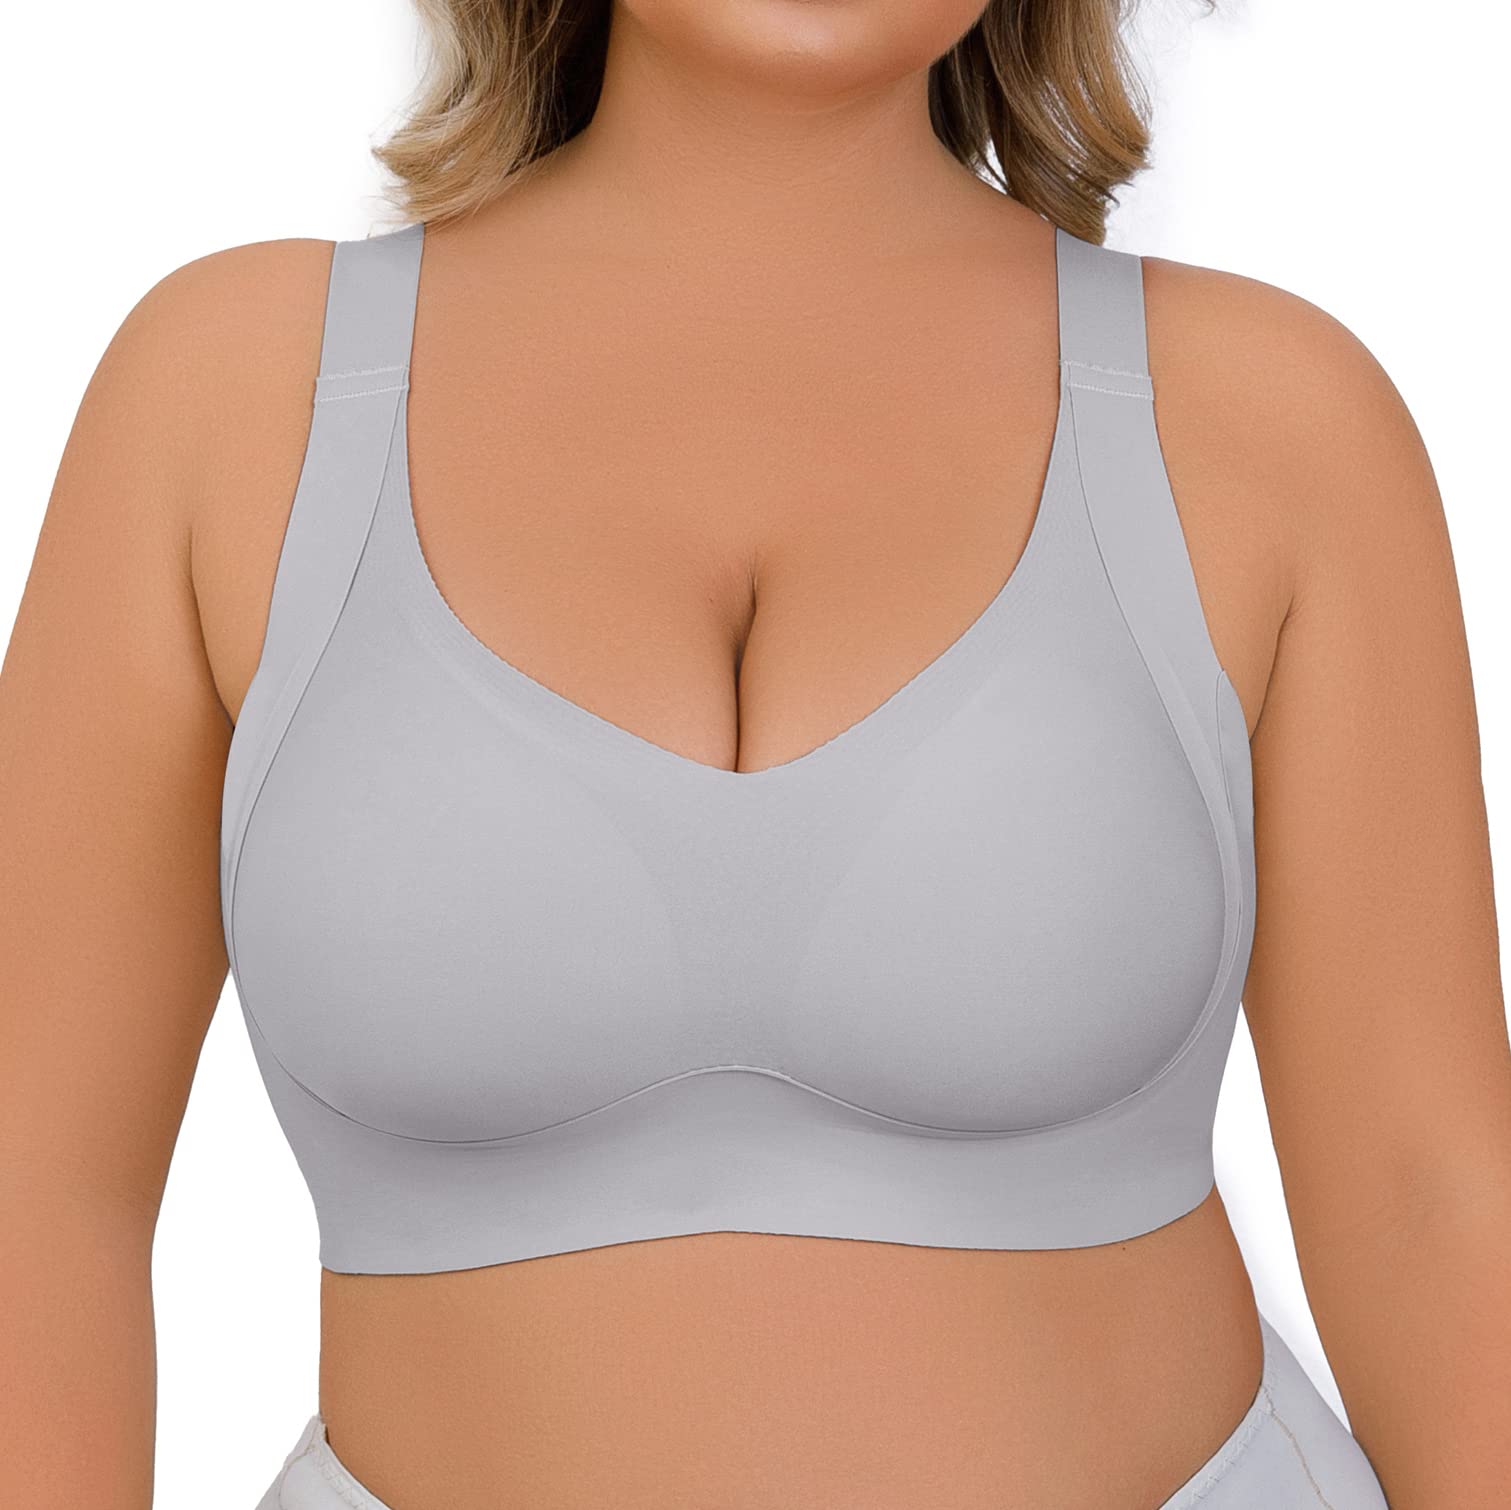 Breathable Cool Lift Up Air Bra - Seamless Wireless Cool Comfort Breathable  Bra